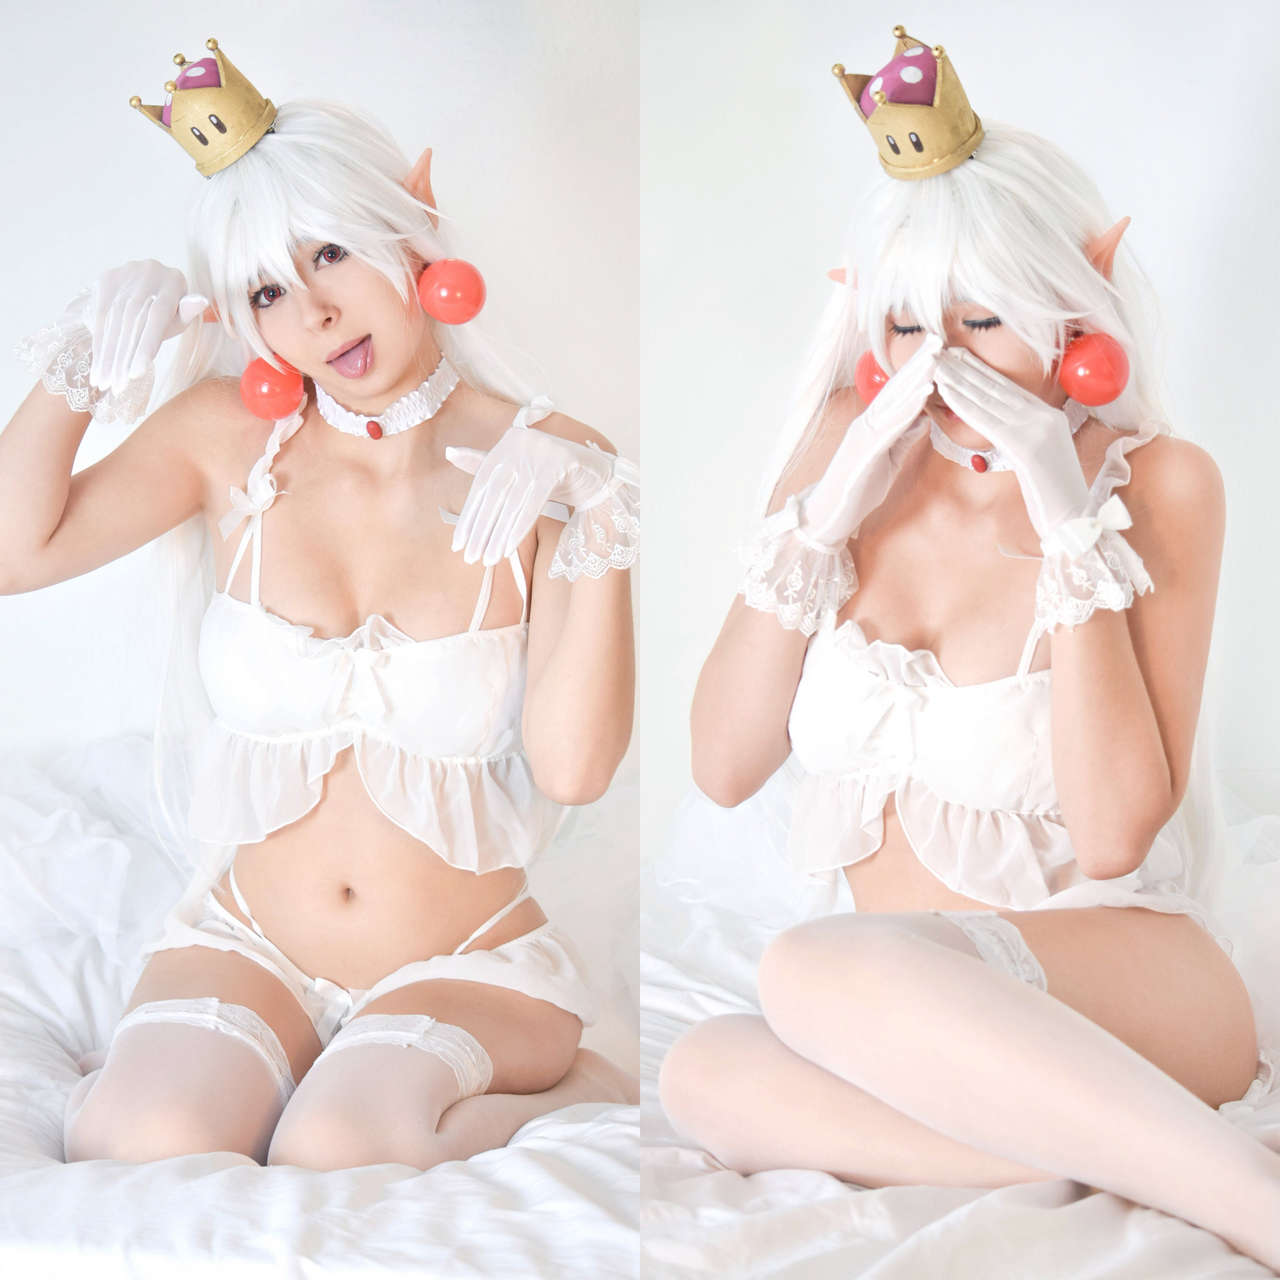 Self B Boo Did I Scare You Fanservice Booette Cosplay By Ribaib